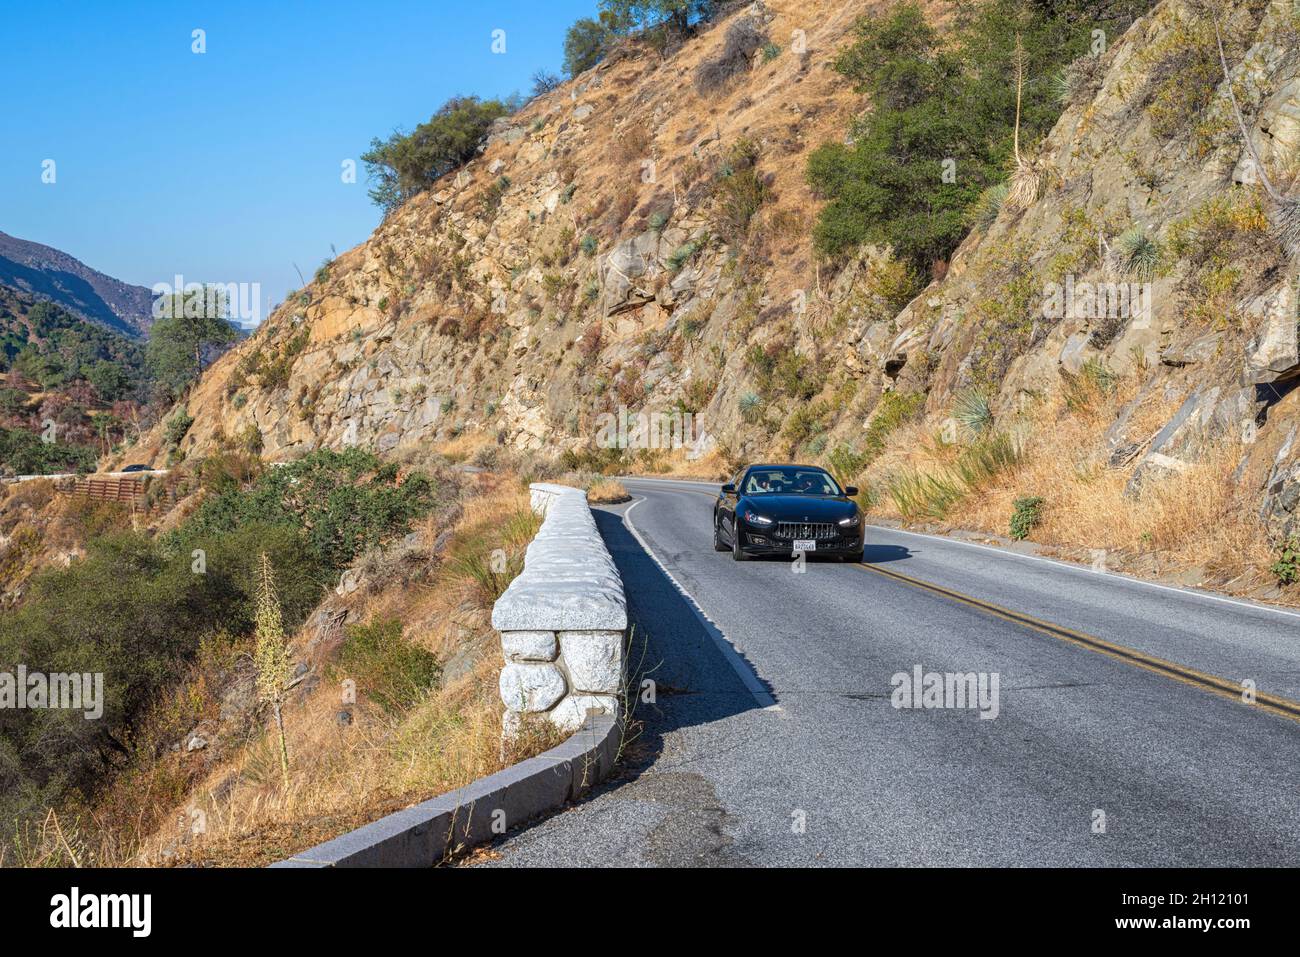 Auto auf dem Generals Highway. Sequoia & Kings Canyon National Parks. Tulare County, CA, USA. Stockfoto